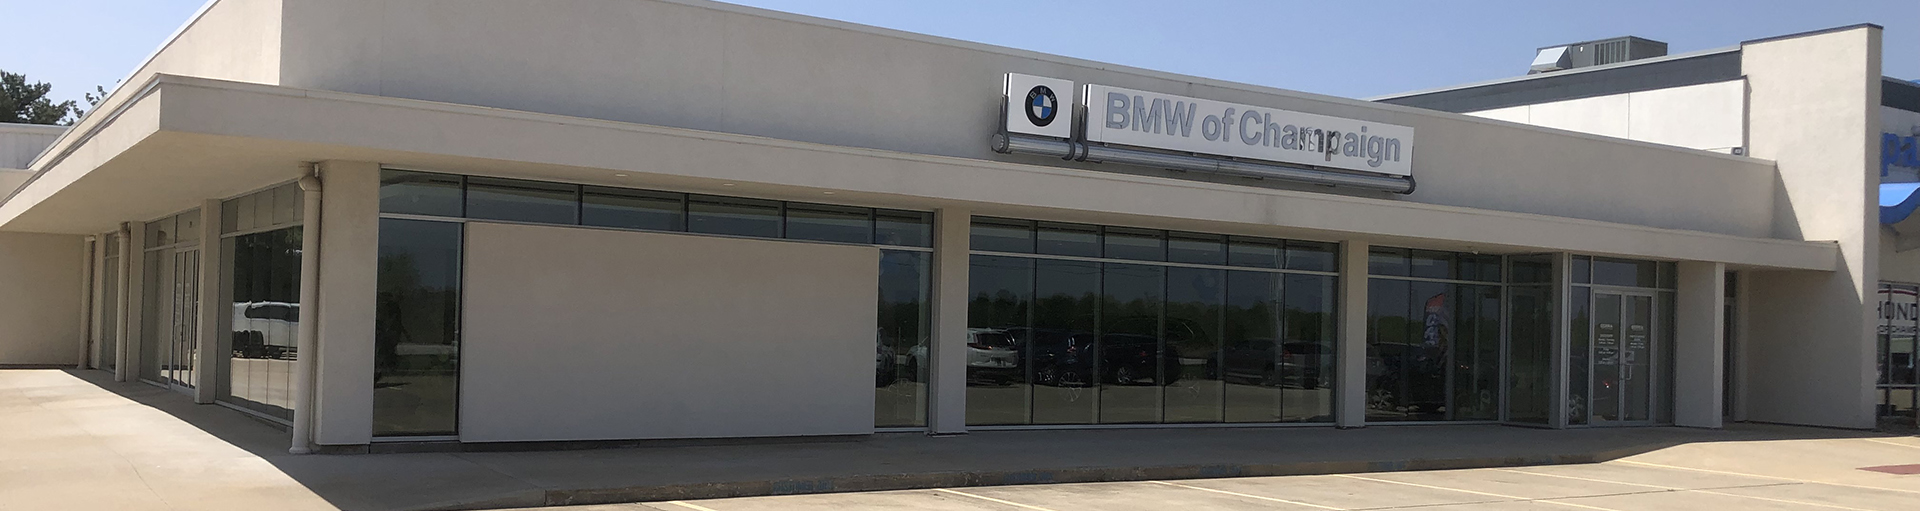 BMW of Champaign Recall Department